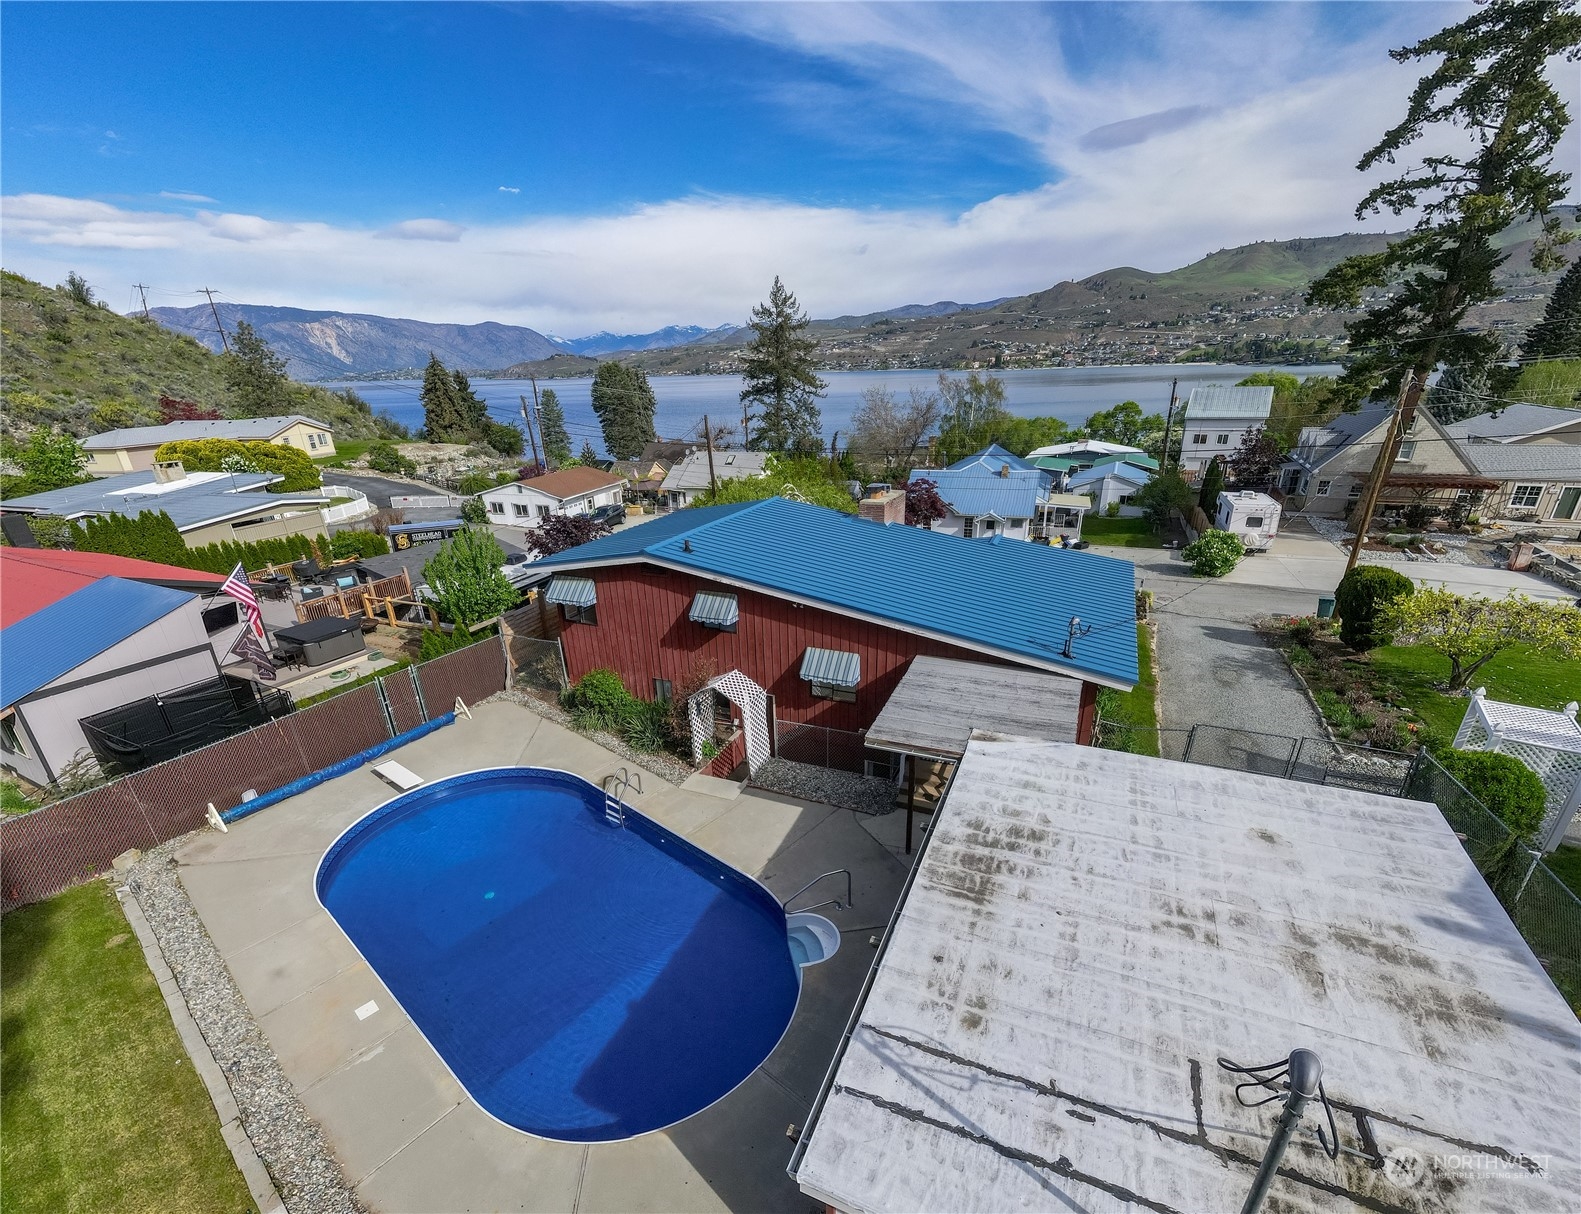 an aerial view of a house with a swimming pool yard and mountain view in back